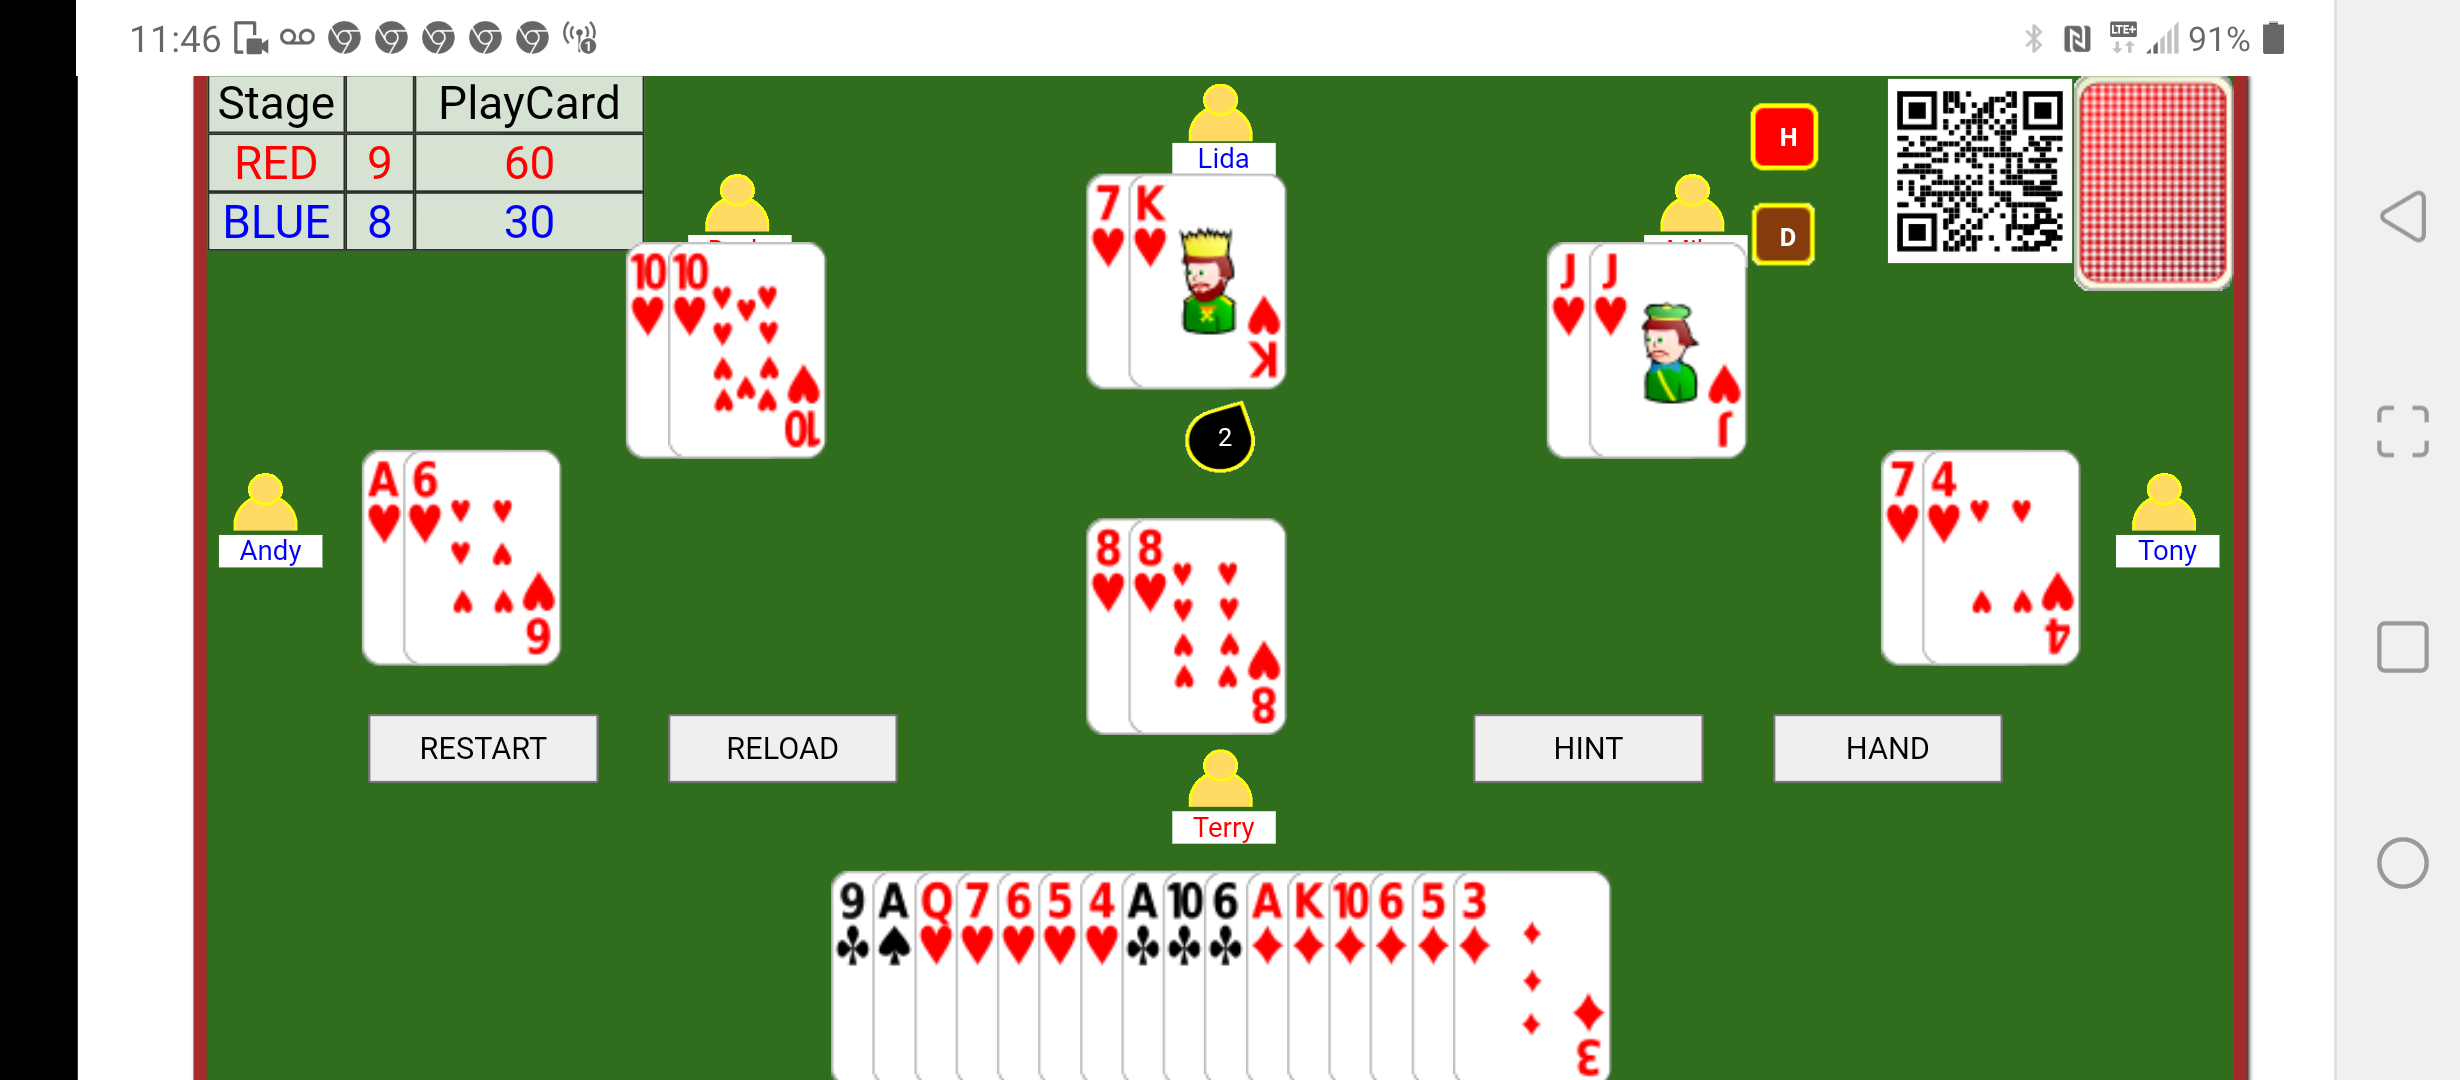 html5 tractor card game Screenshot_20220120-114633.png